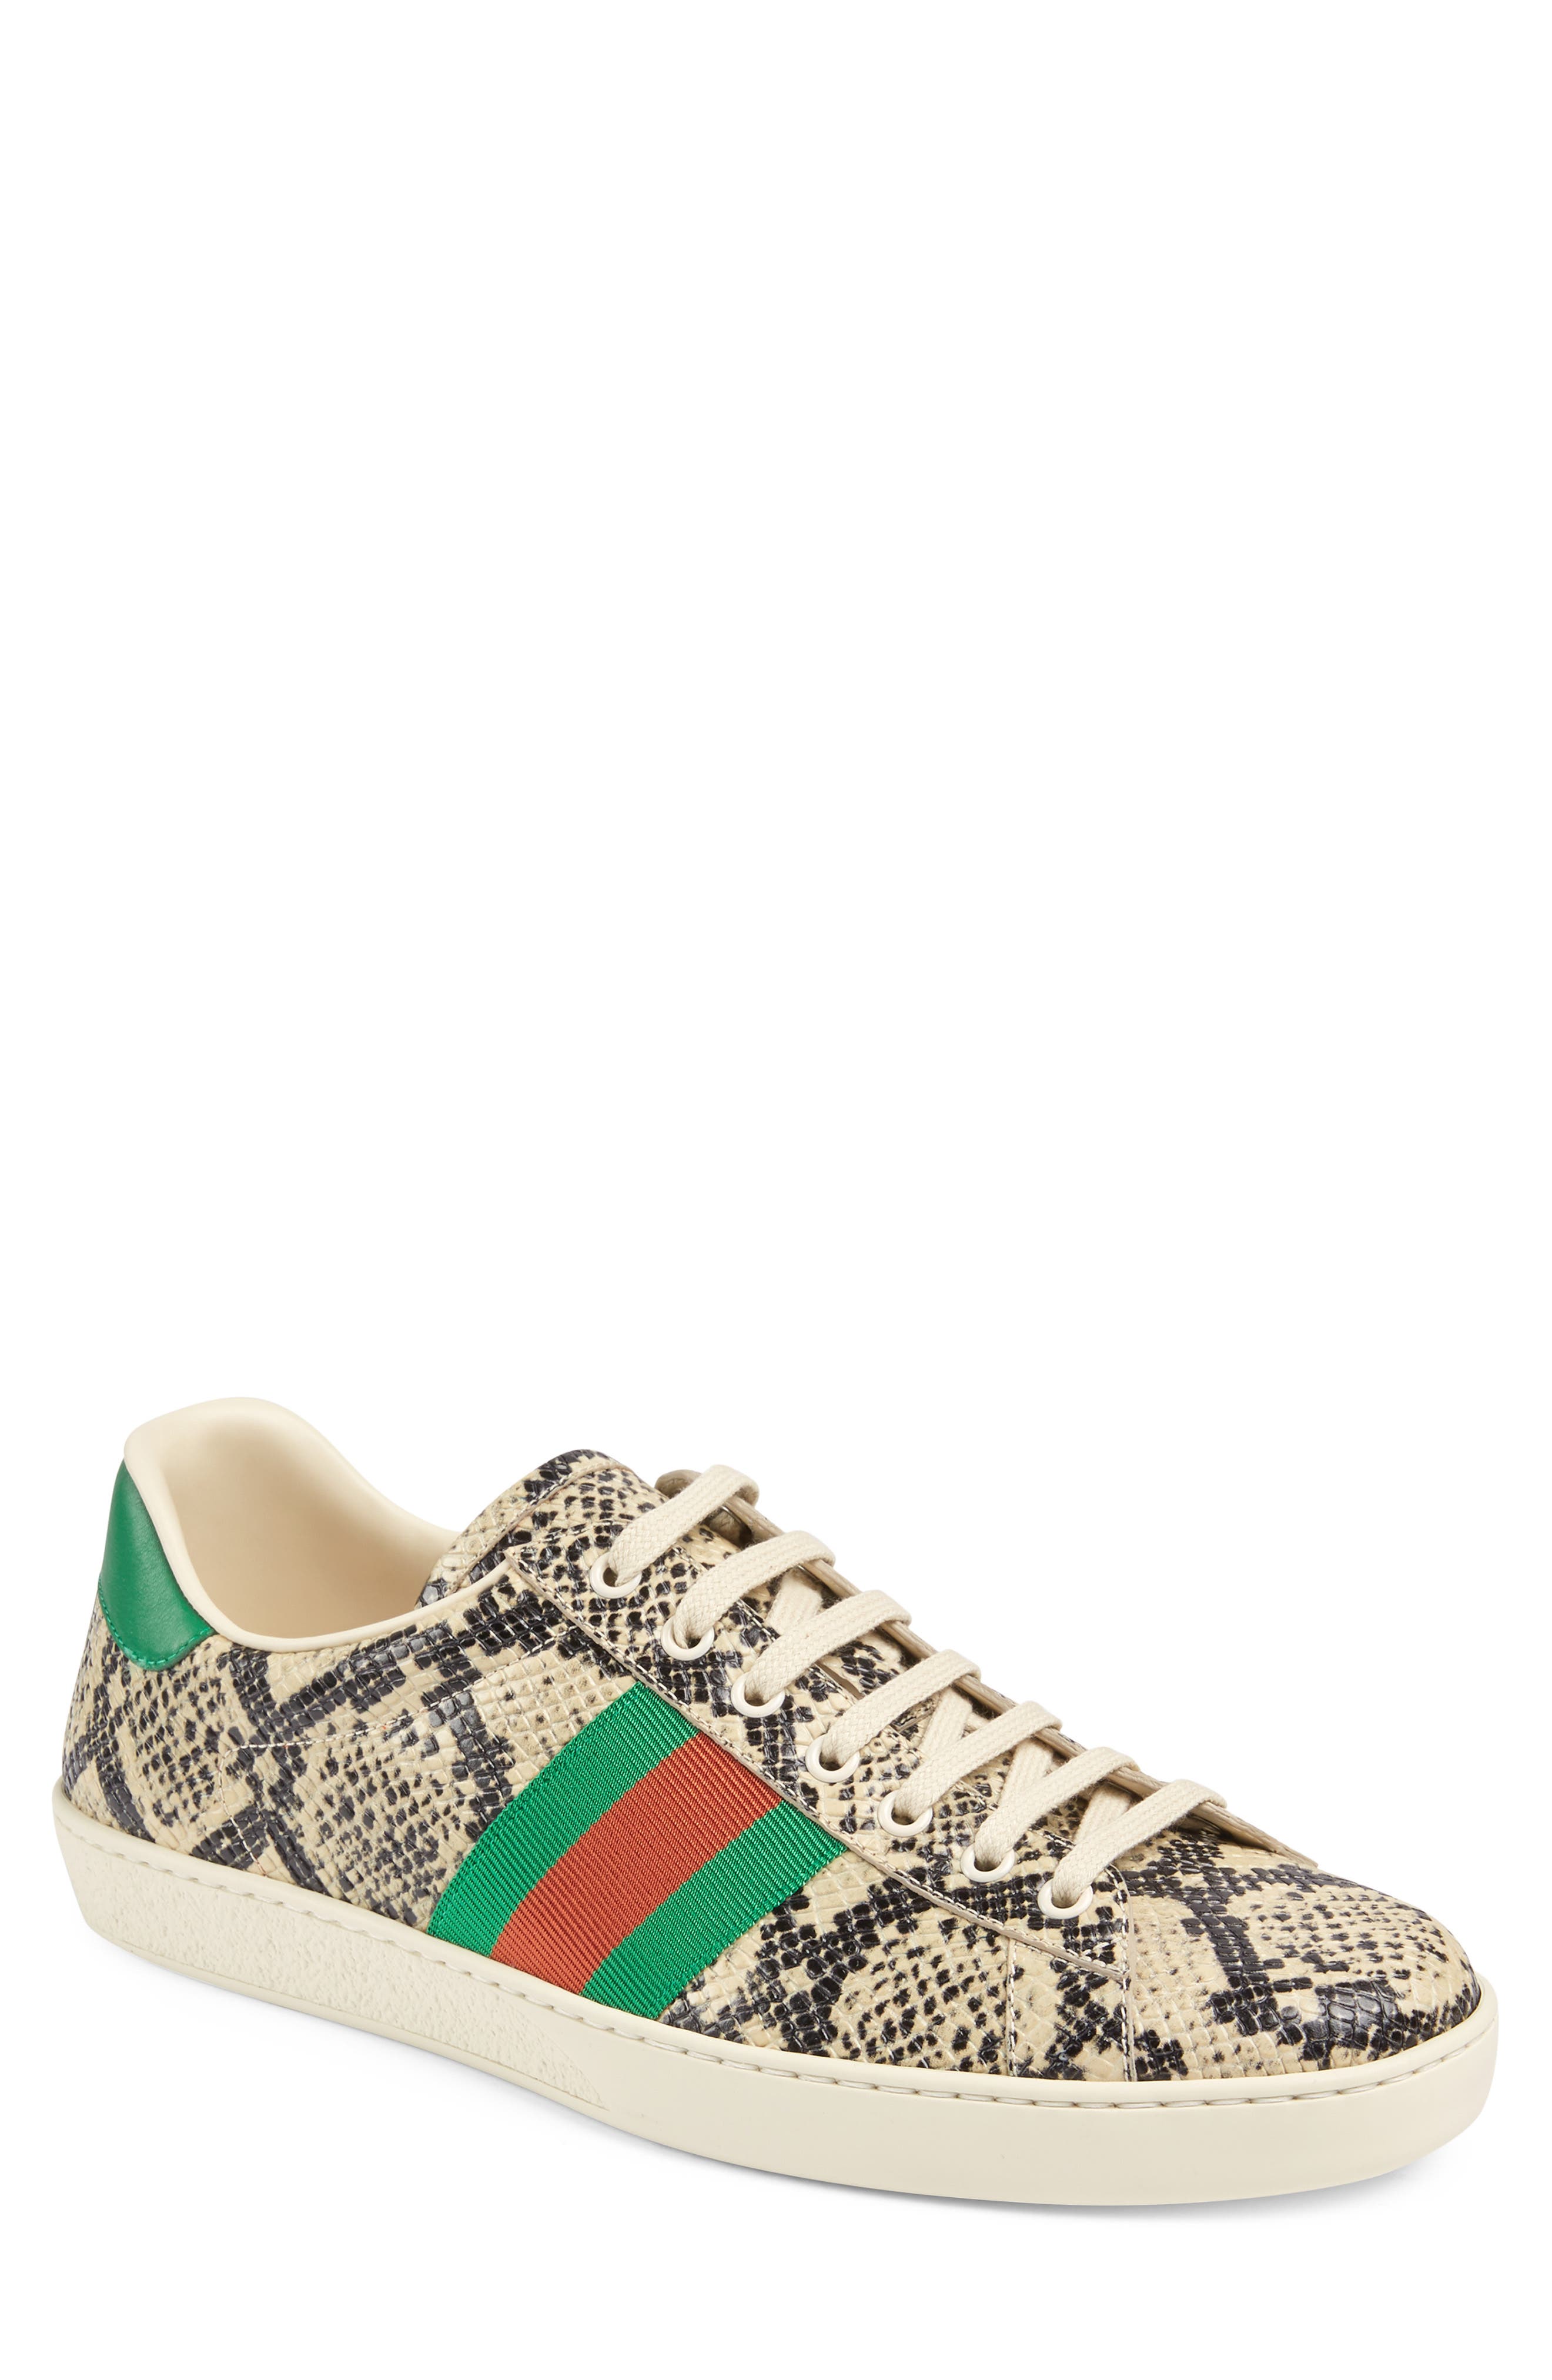 gold gucci sneakers mens